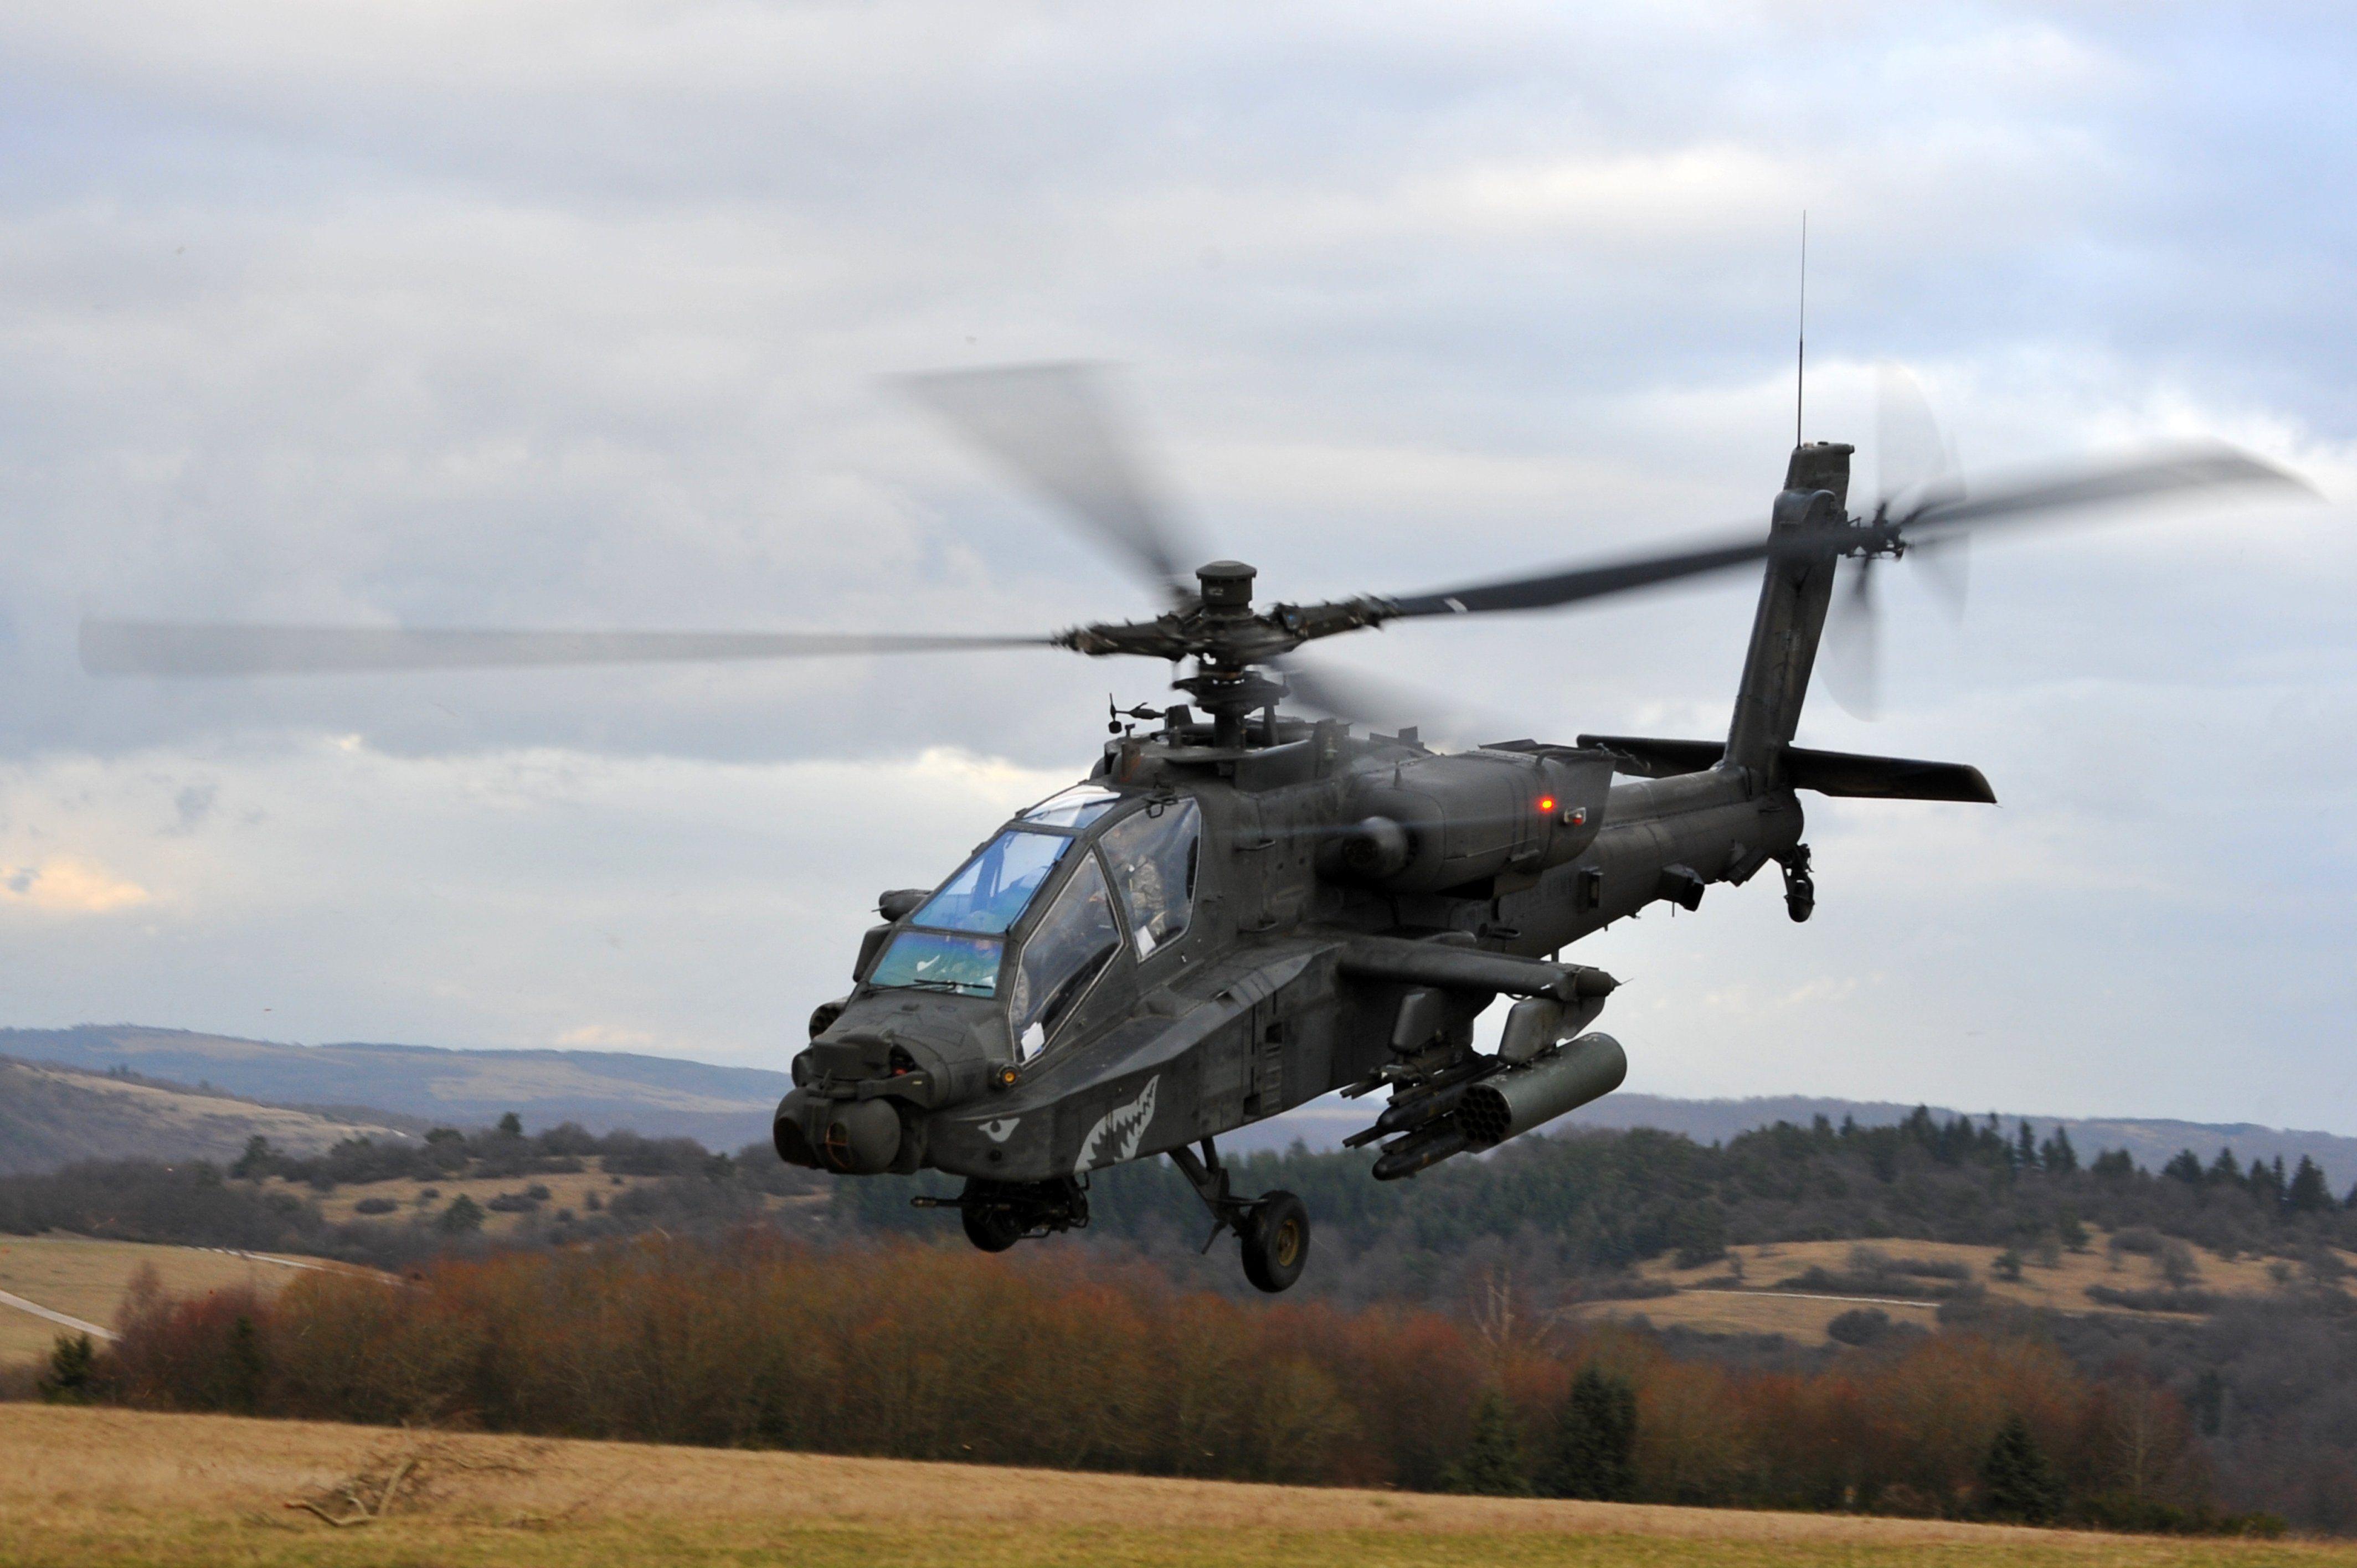 AH 64 APACHE Attack Helicopter Army Military Weapon (18)_JPG